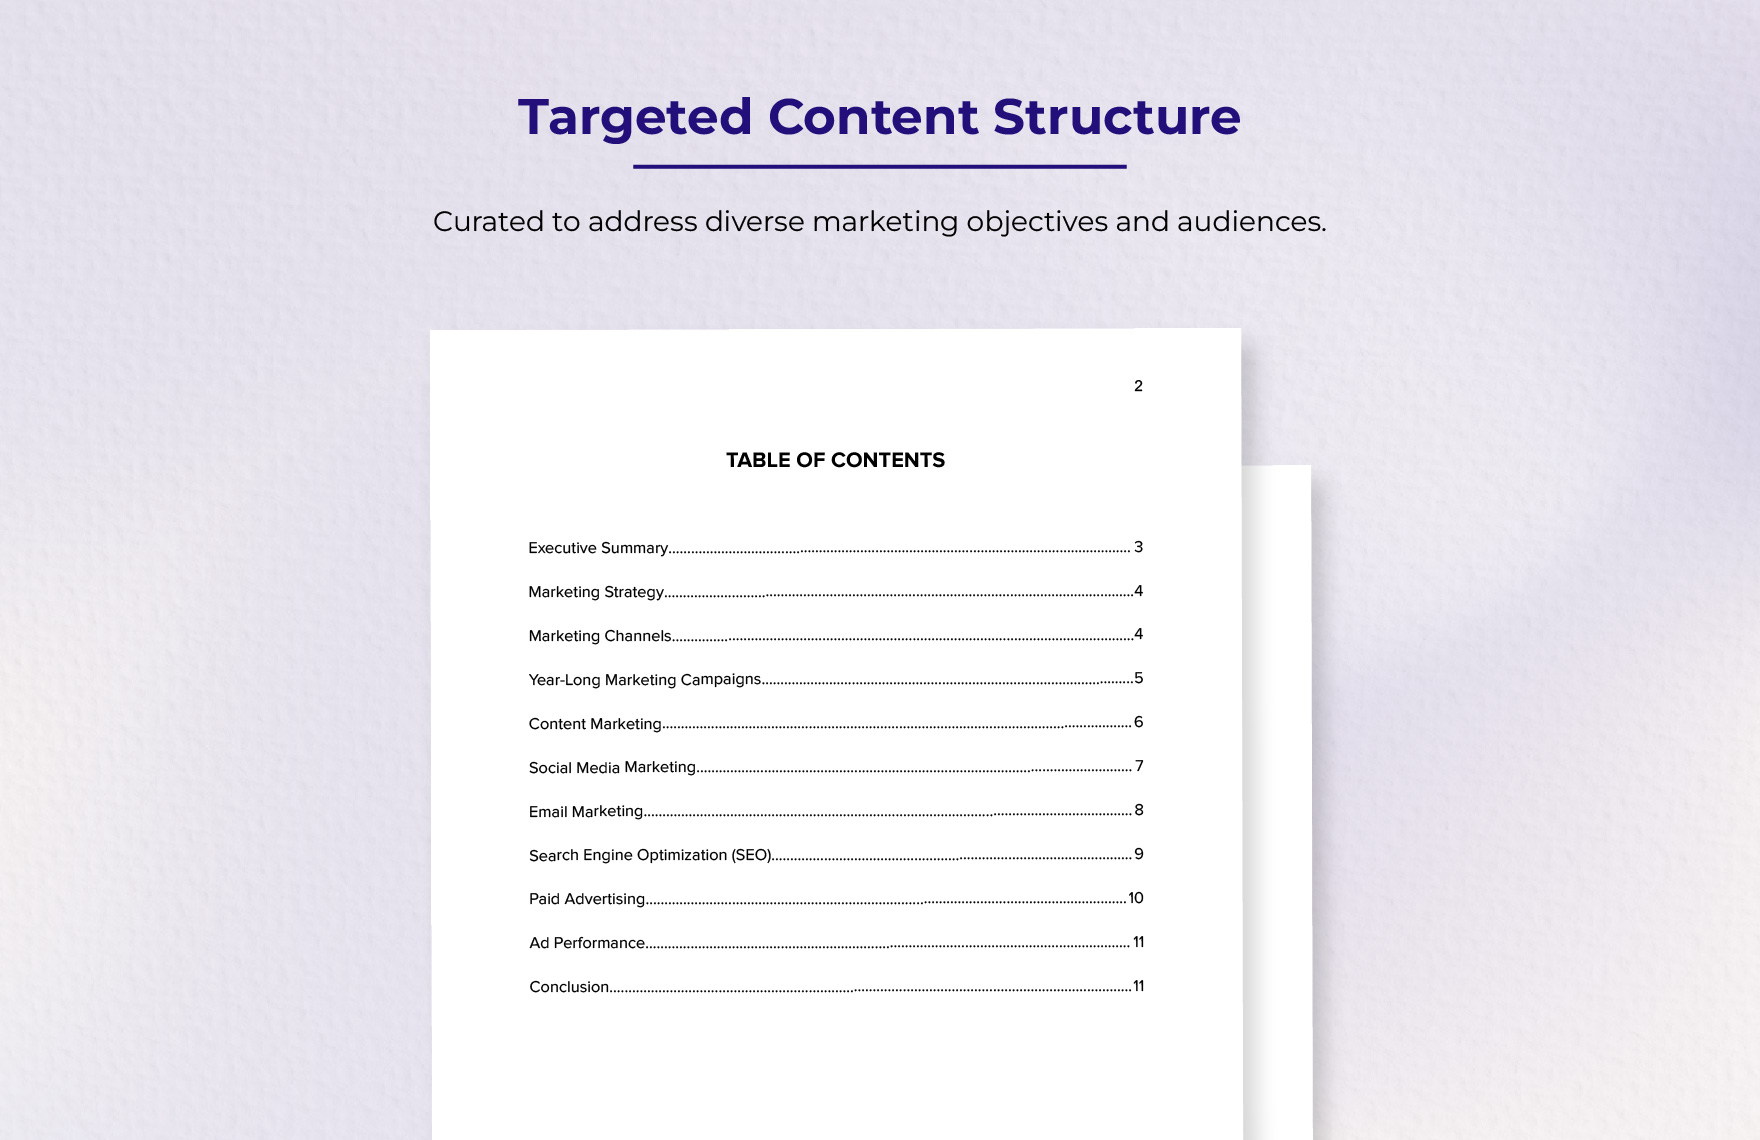 Year-end Marketing Report Template